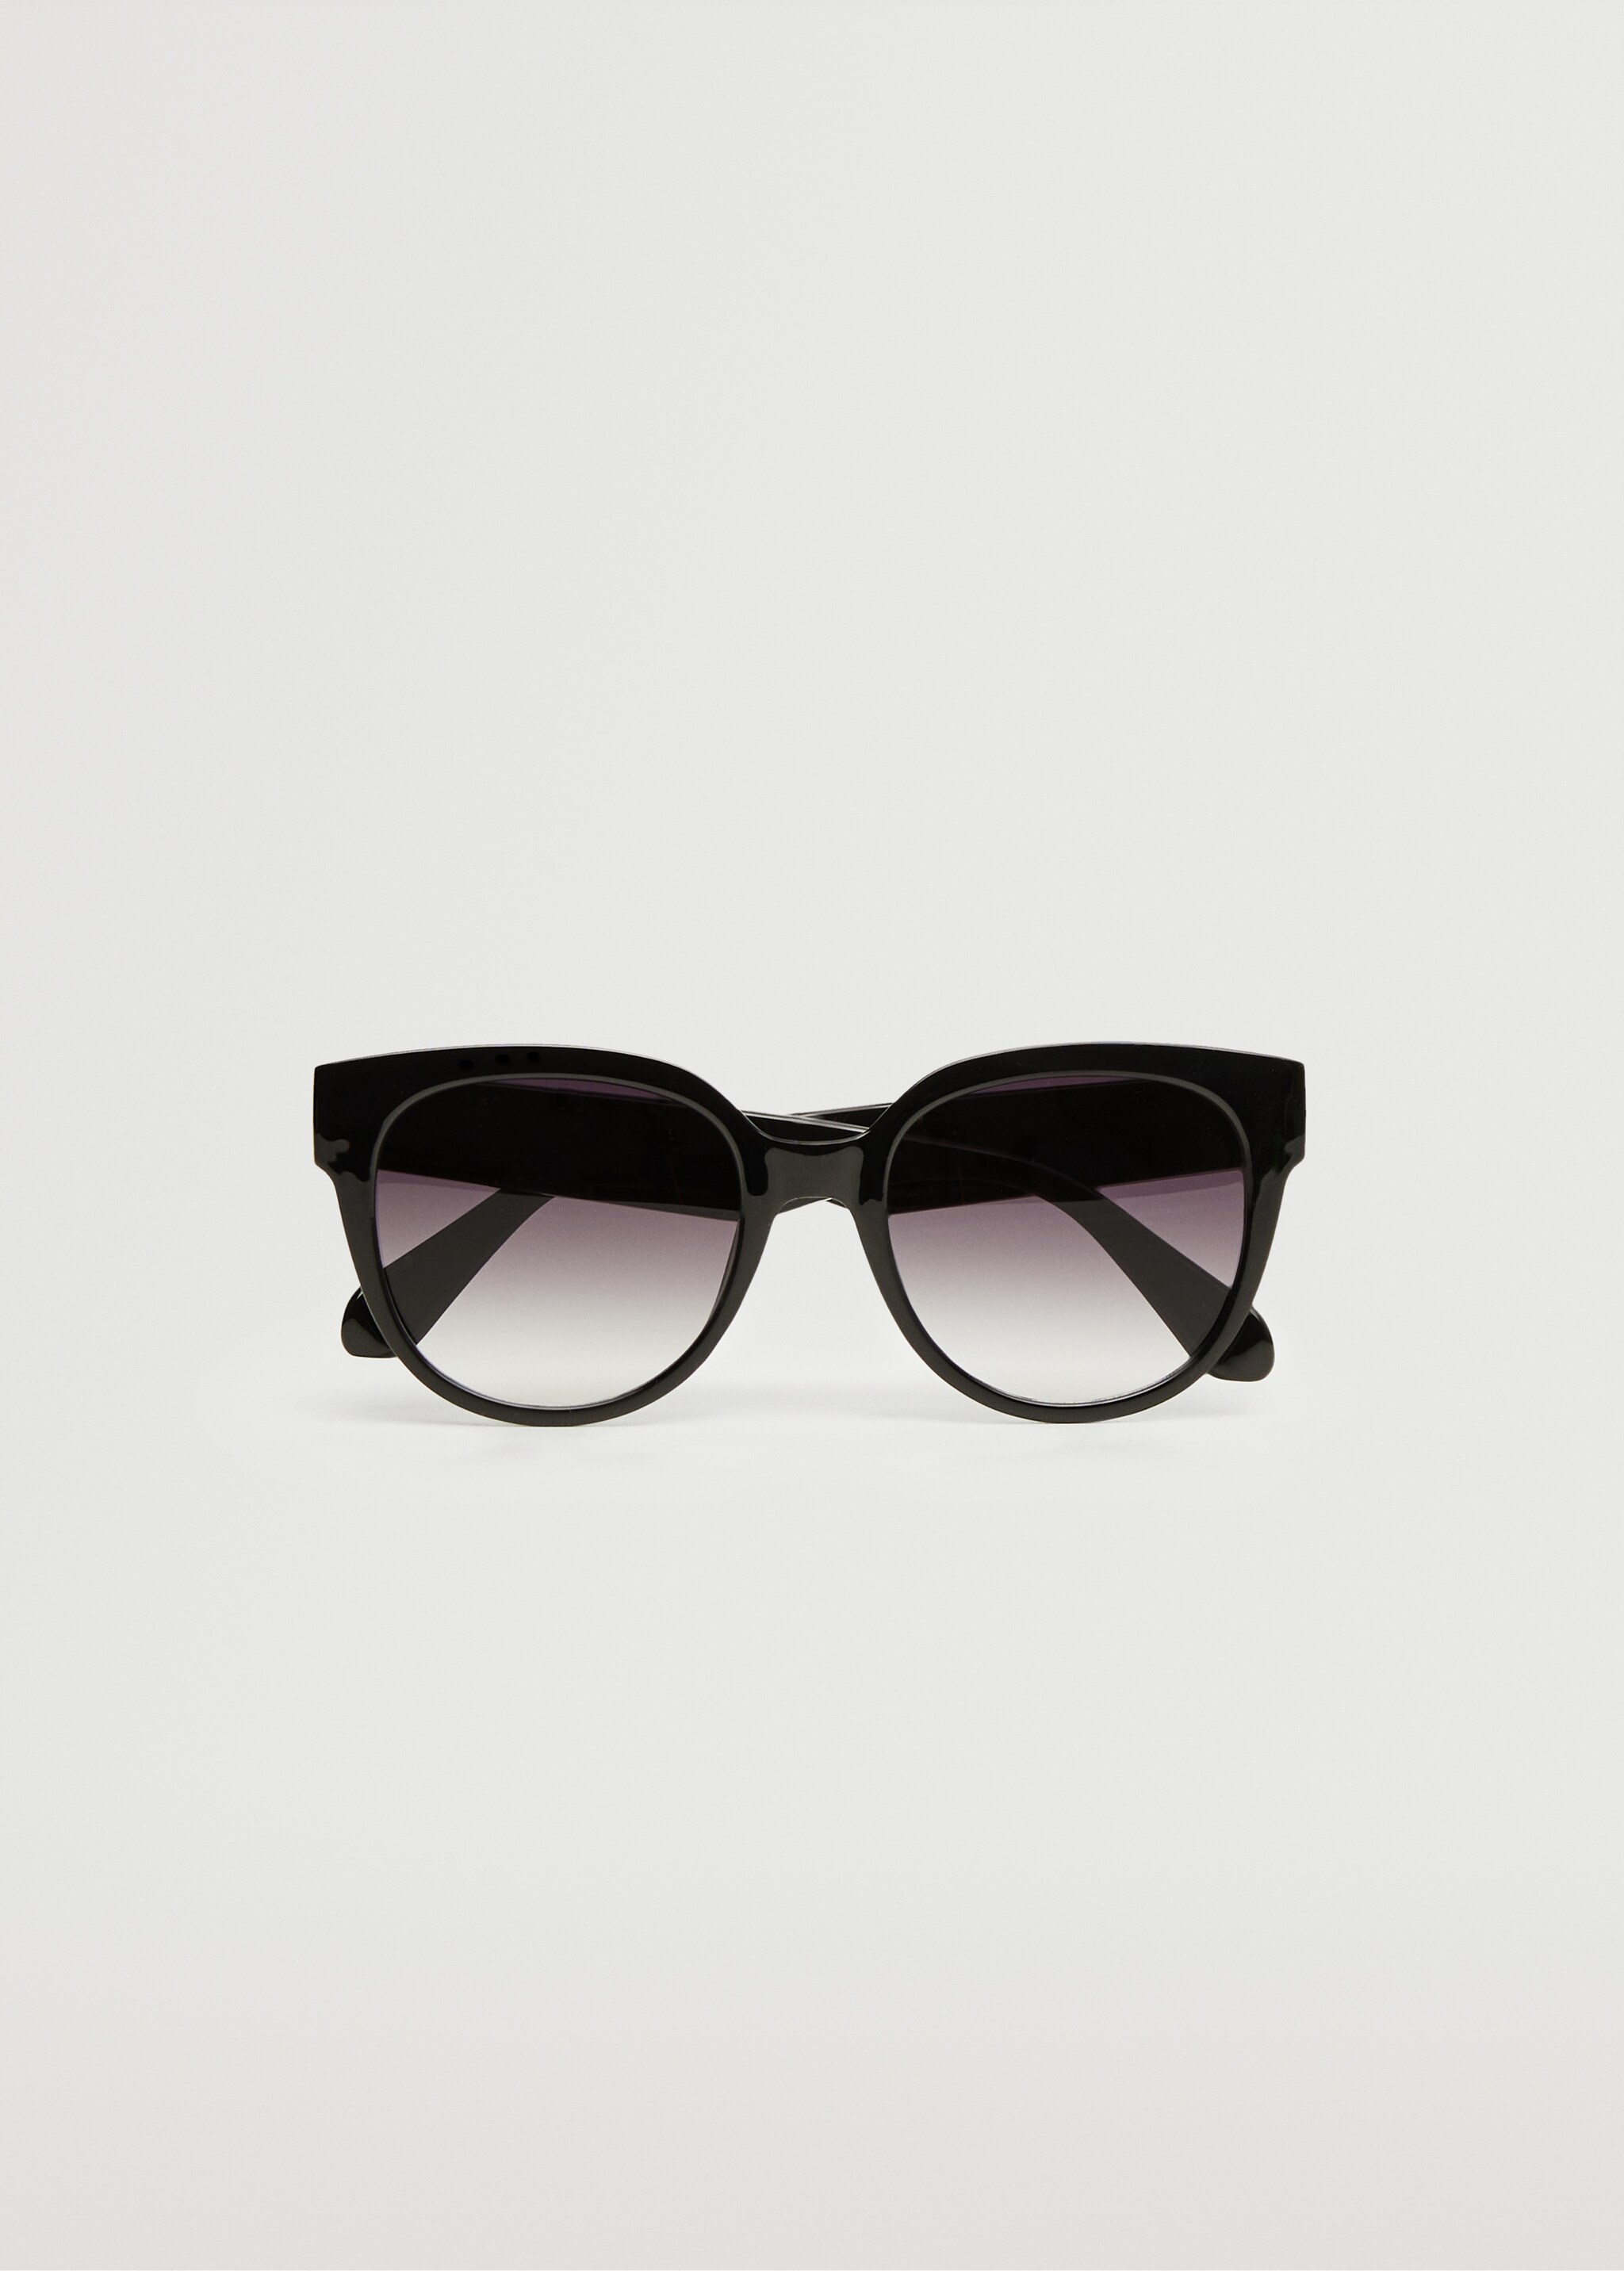 Cat-eye sunglasses - Article without model